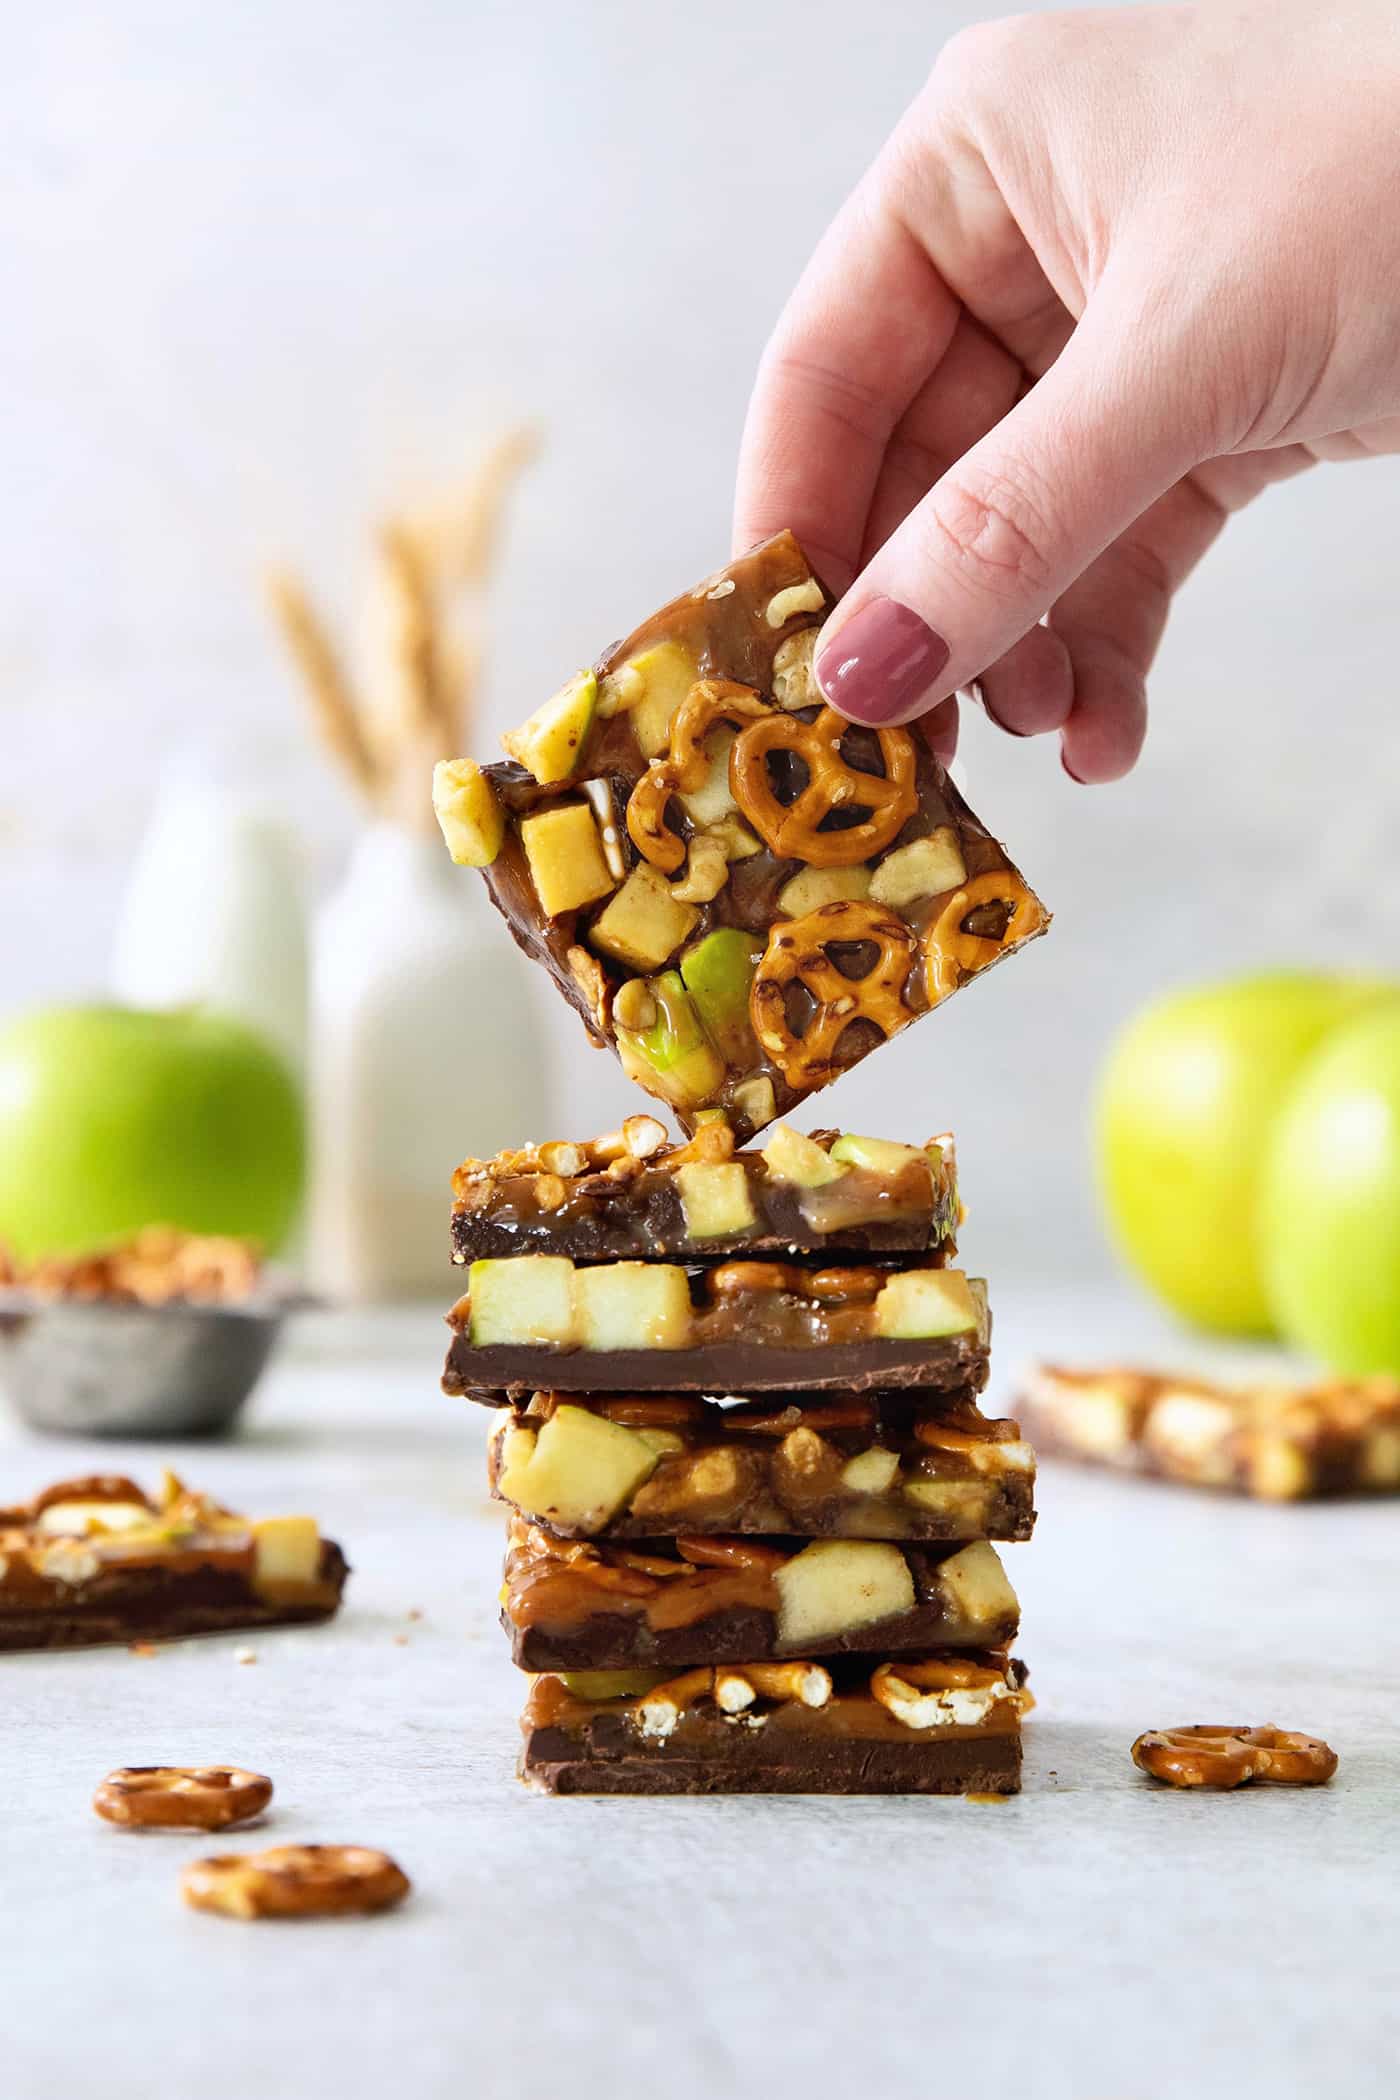 A hand lifts up a piece of caramel apple bark from a stack of bark.